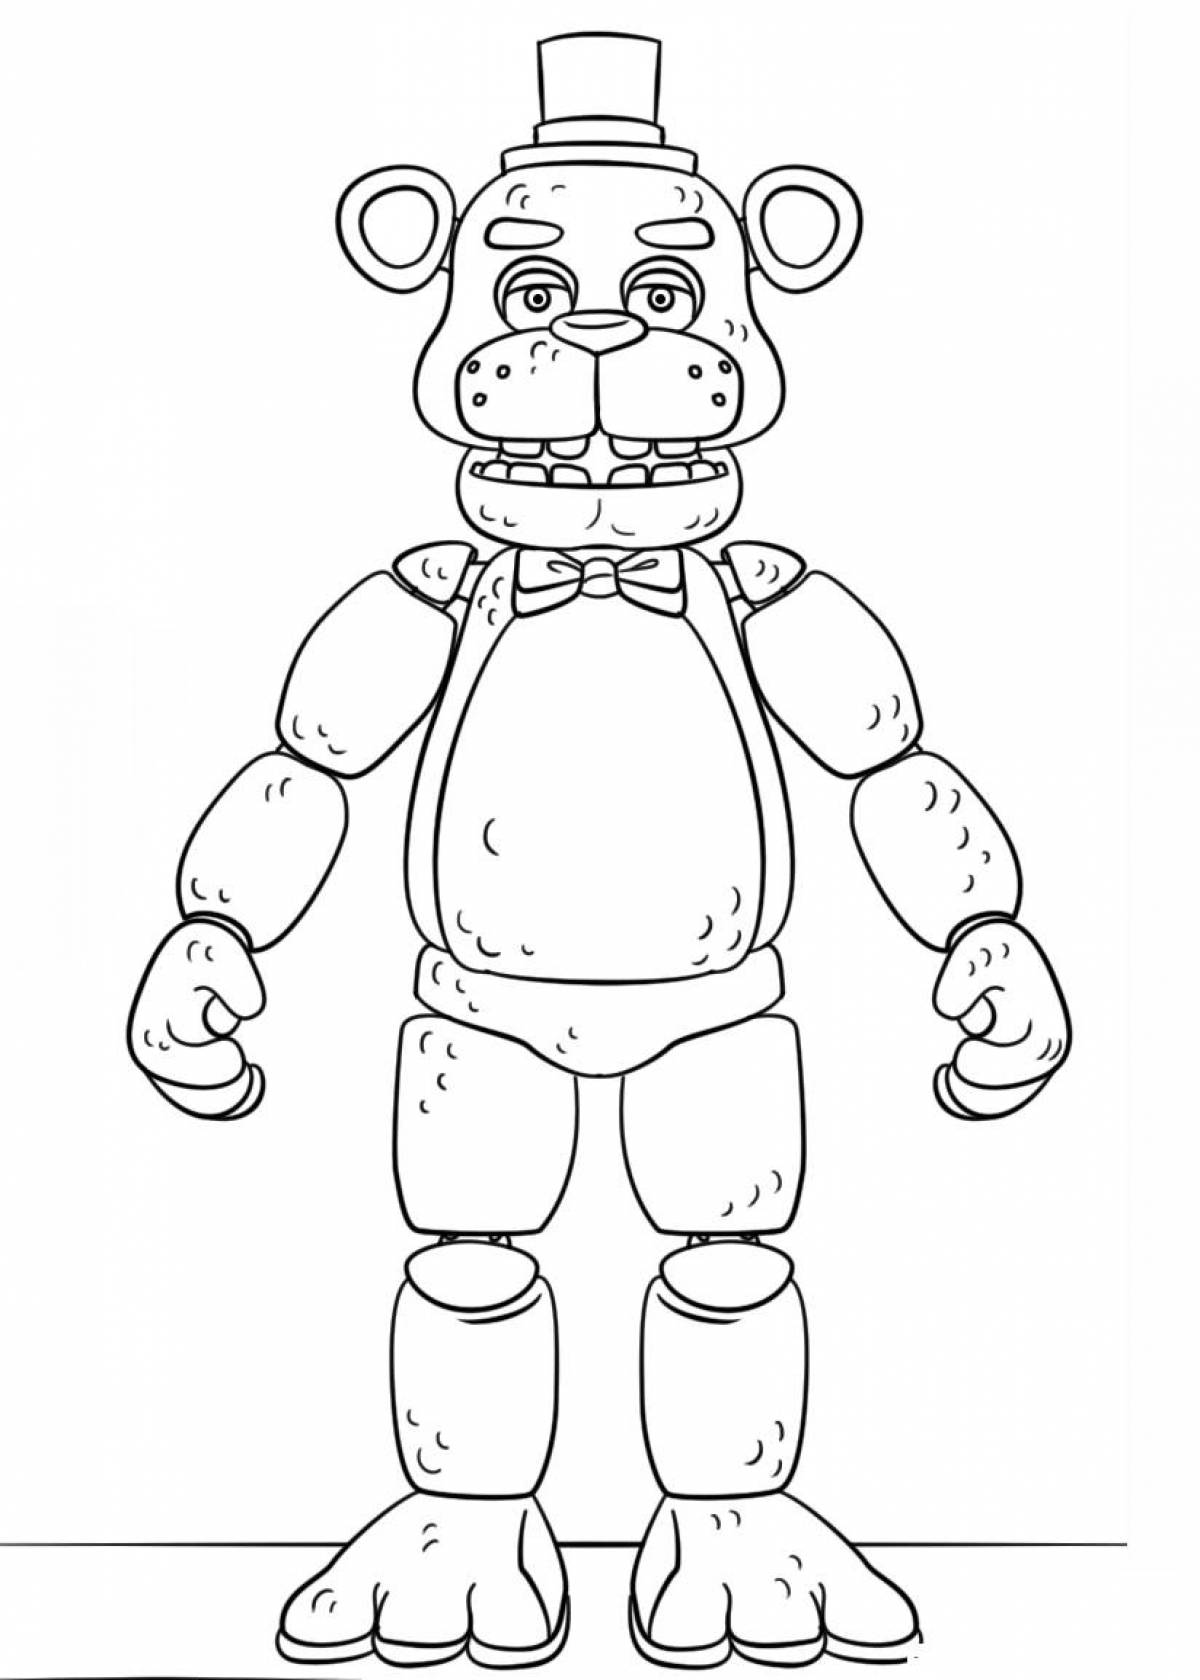 Freddy's bright coloring page